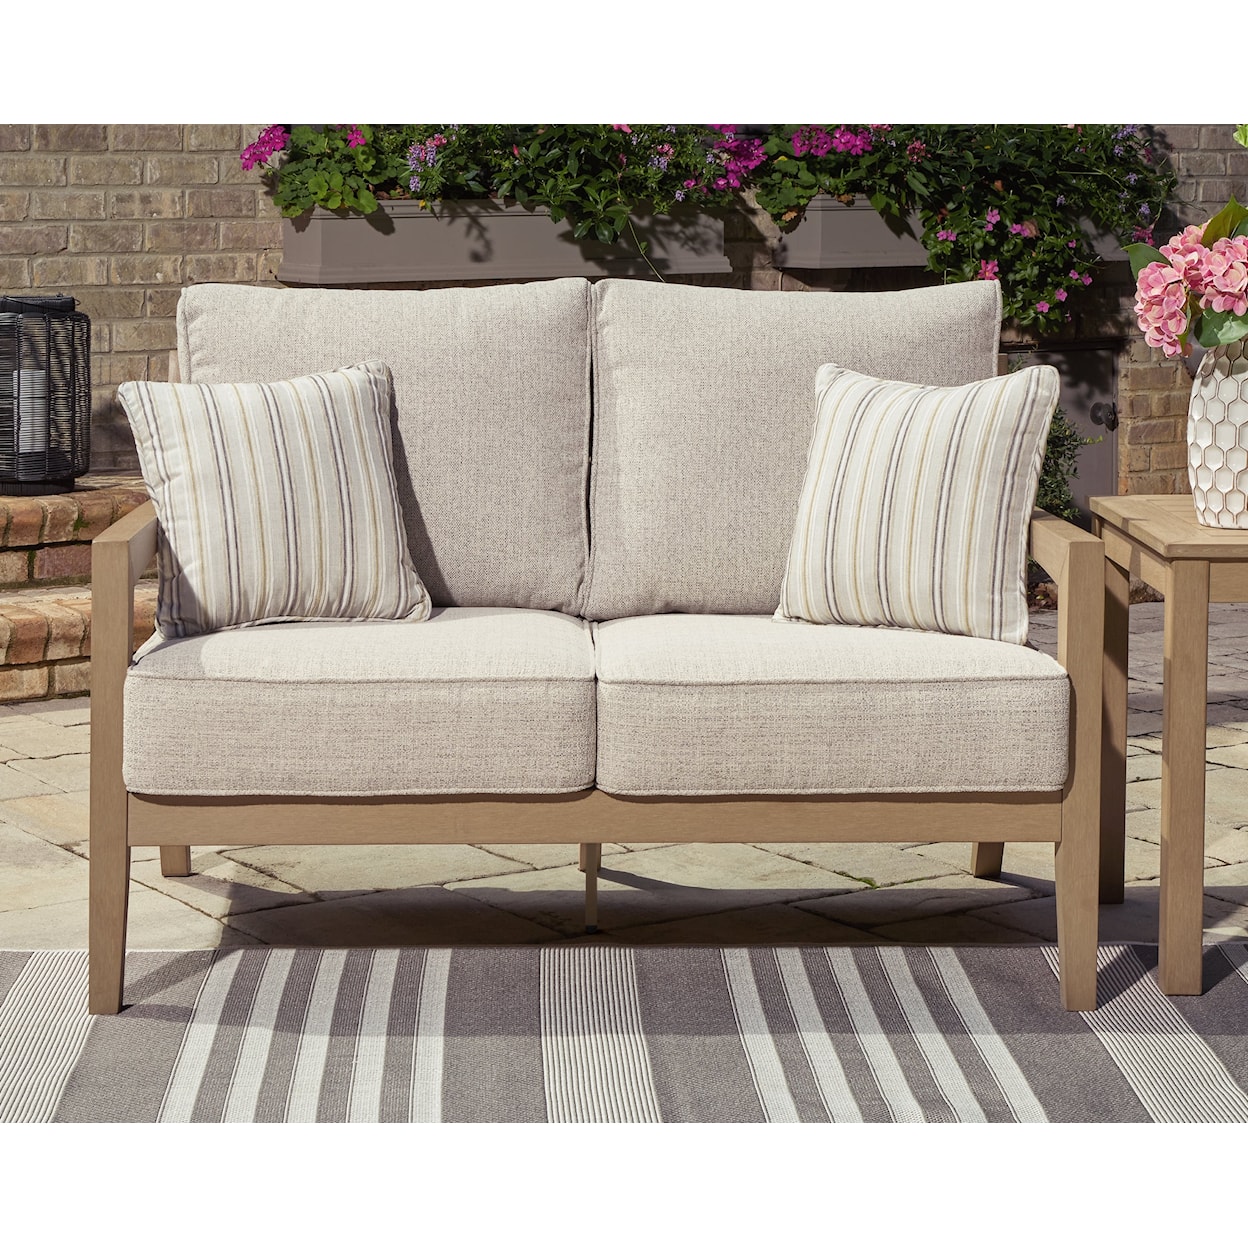 Signature Design by Ashley Hallow Creek Outdoor Loveseat with Cushion